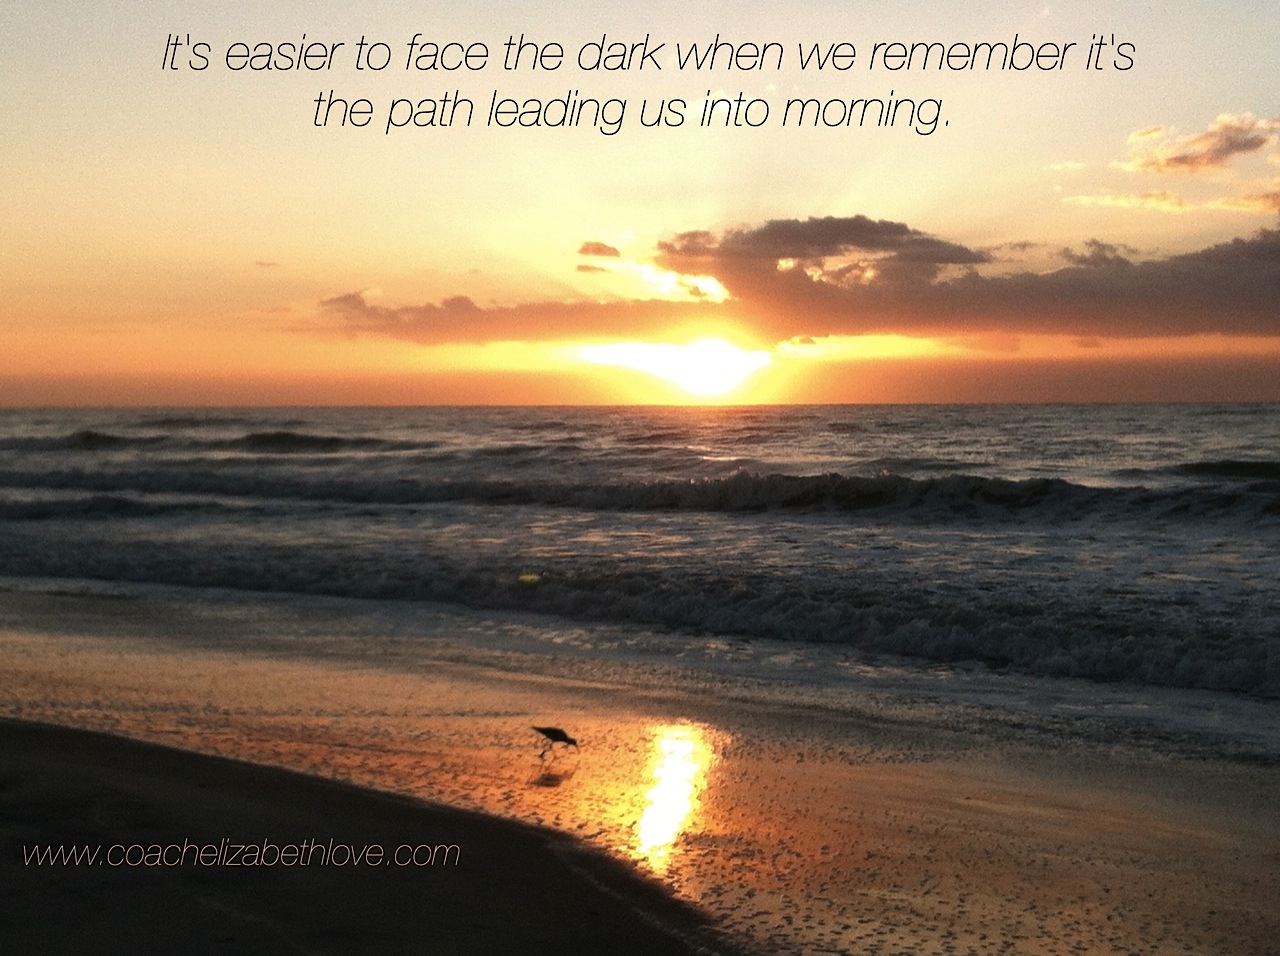 After the darkness…